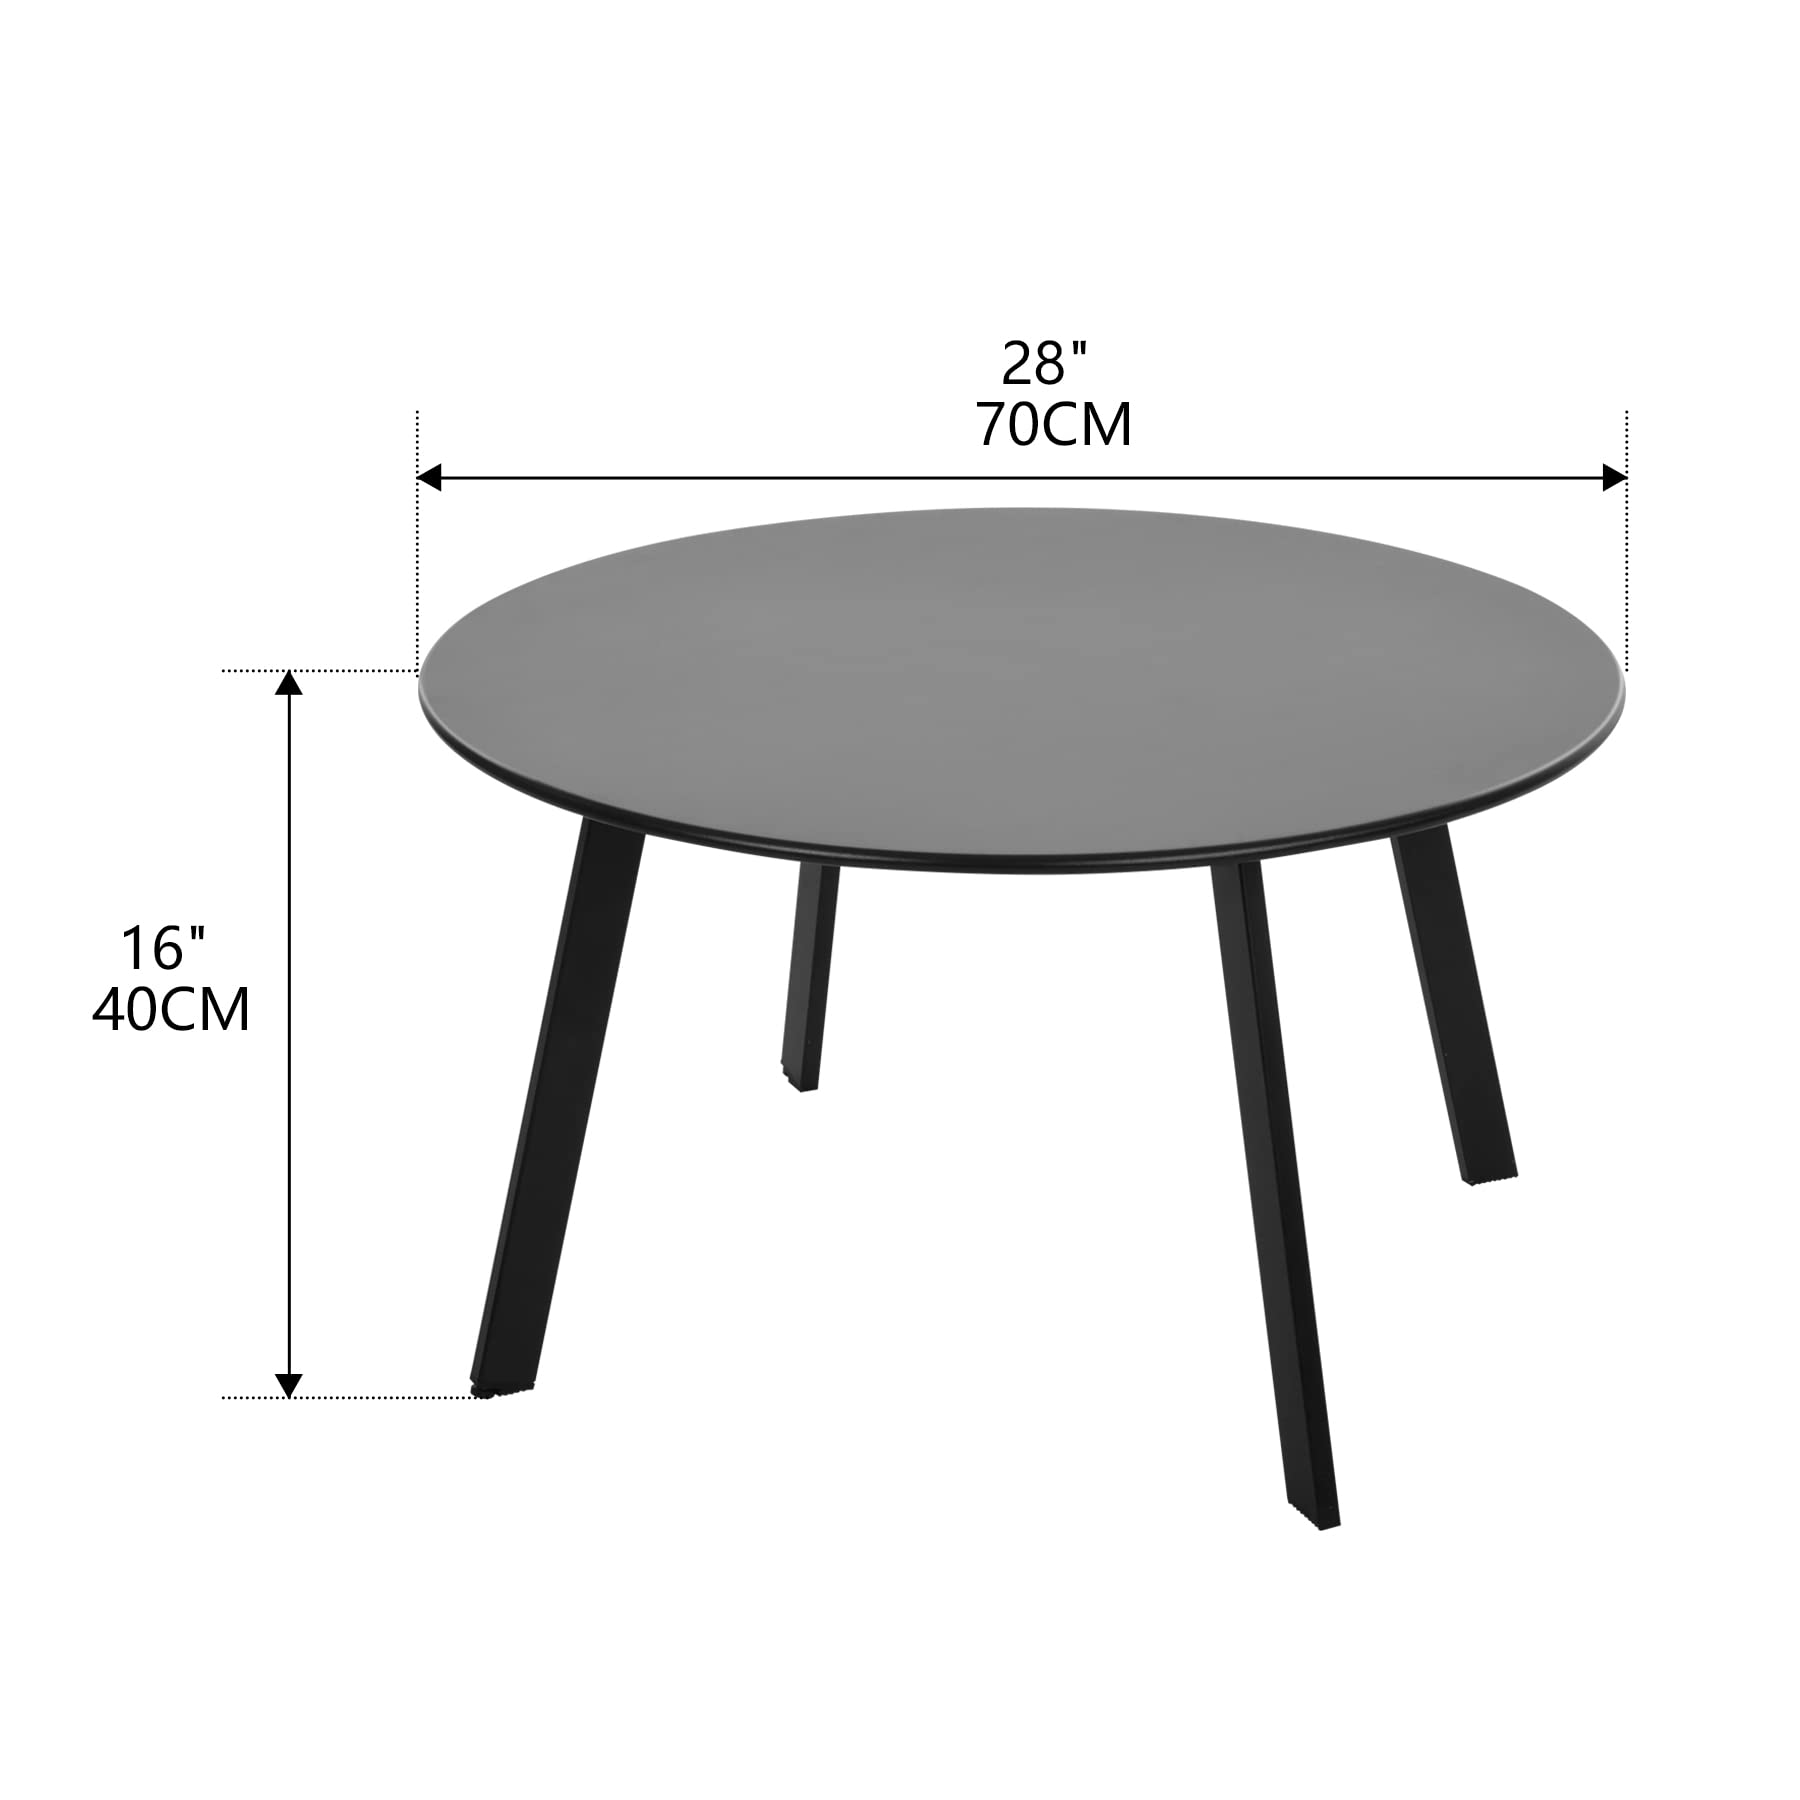 Meluvici Patio coffee Table, Metal Steel Outdoor Round Table Weather Resistant Anti-Rust Outdoor Table(Black)